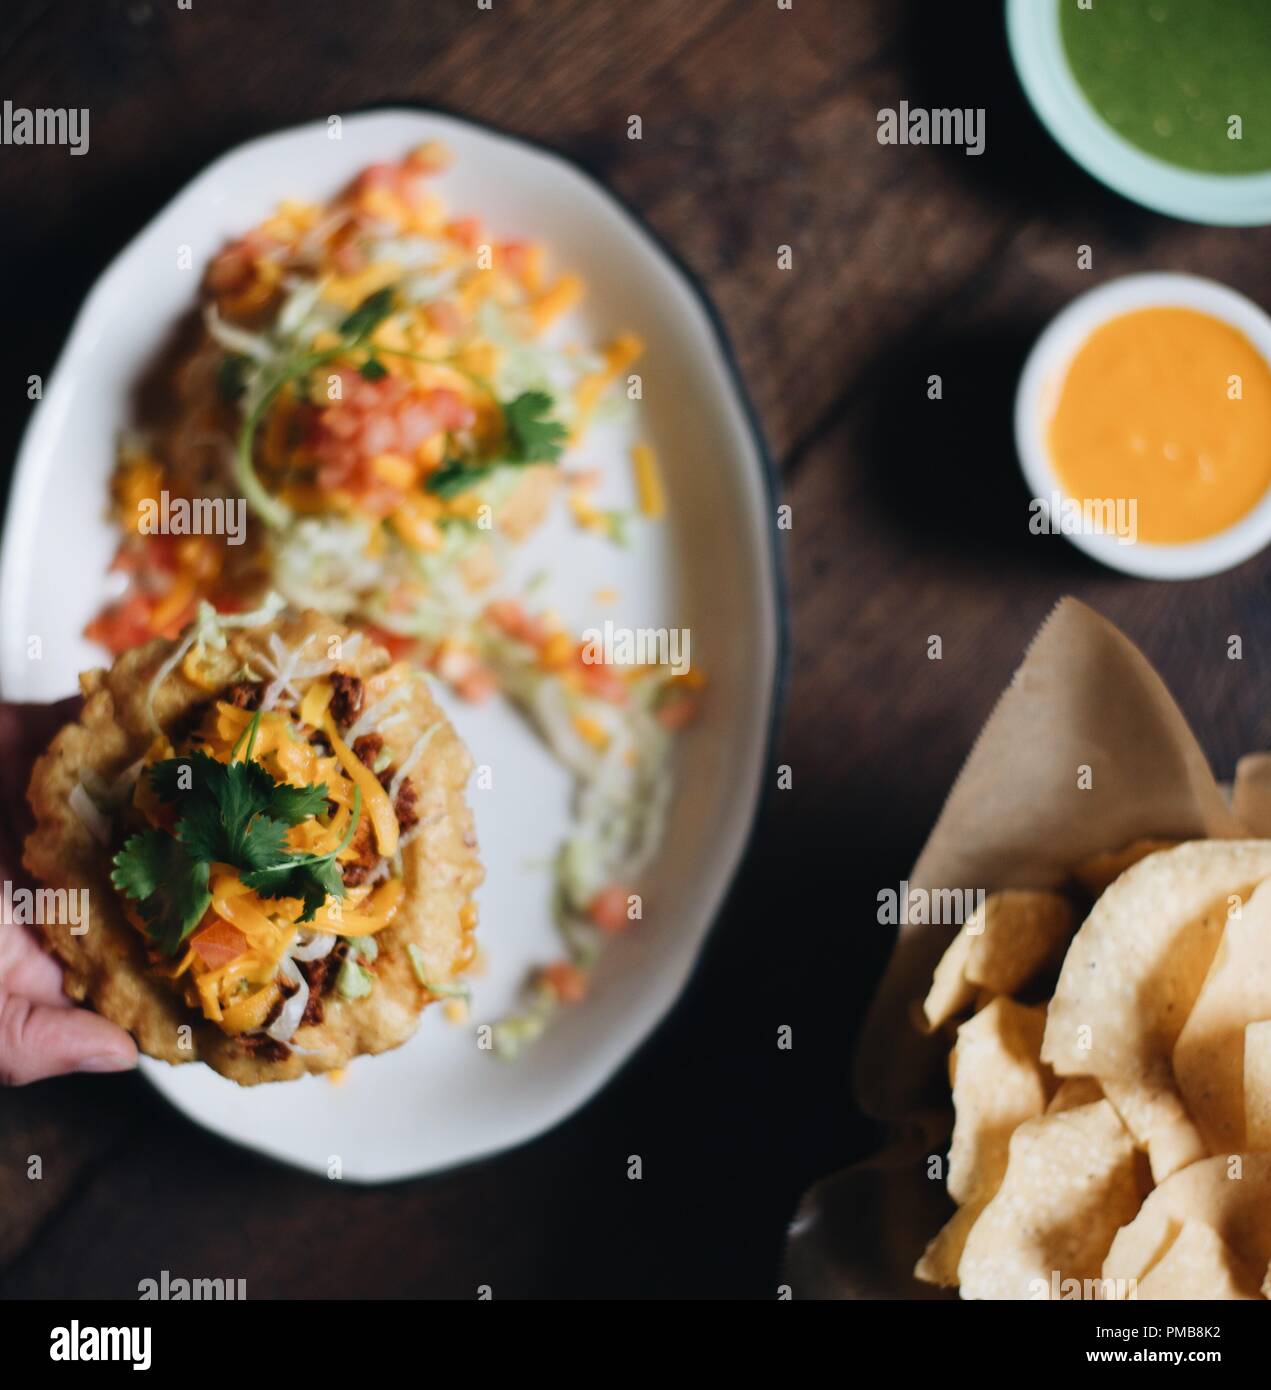 Tex-Mex meets fine dining with custom ceramic plates of traditional tex-mex dishes including puffy street corn tacos with verde and habanero salsas. Stock Photo